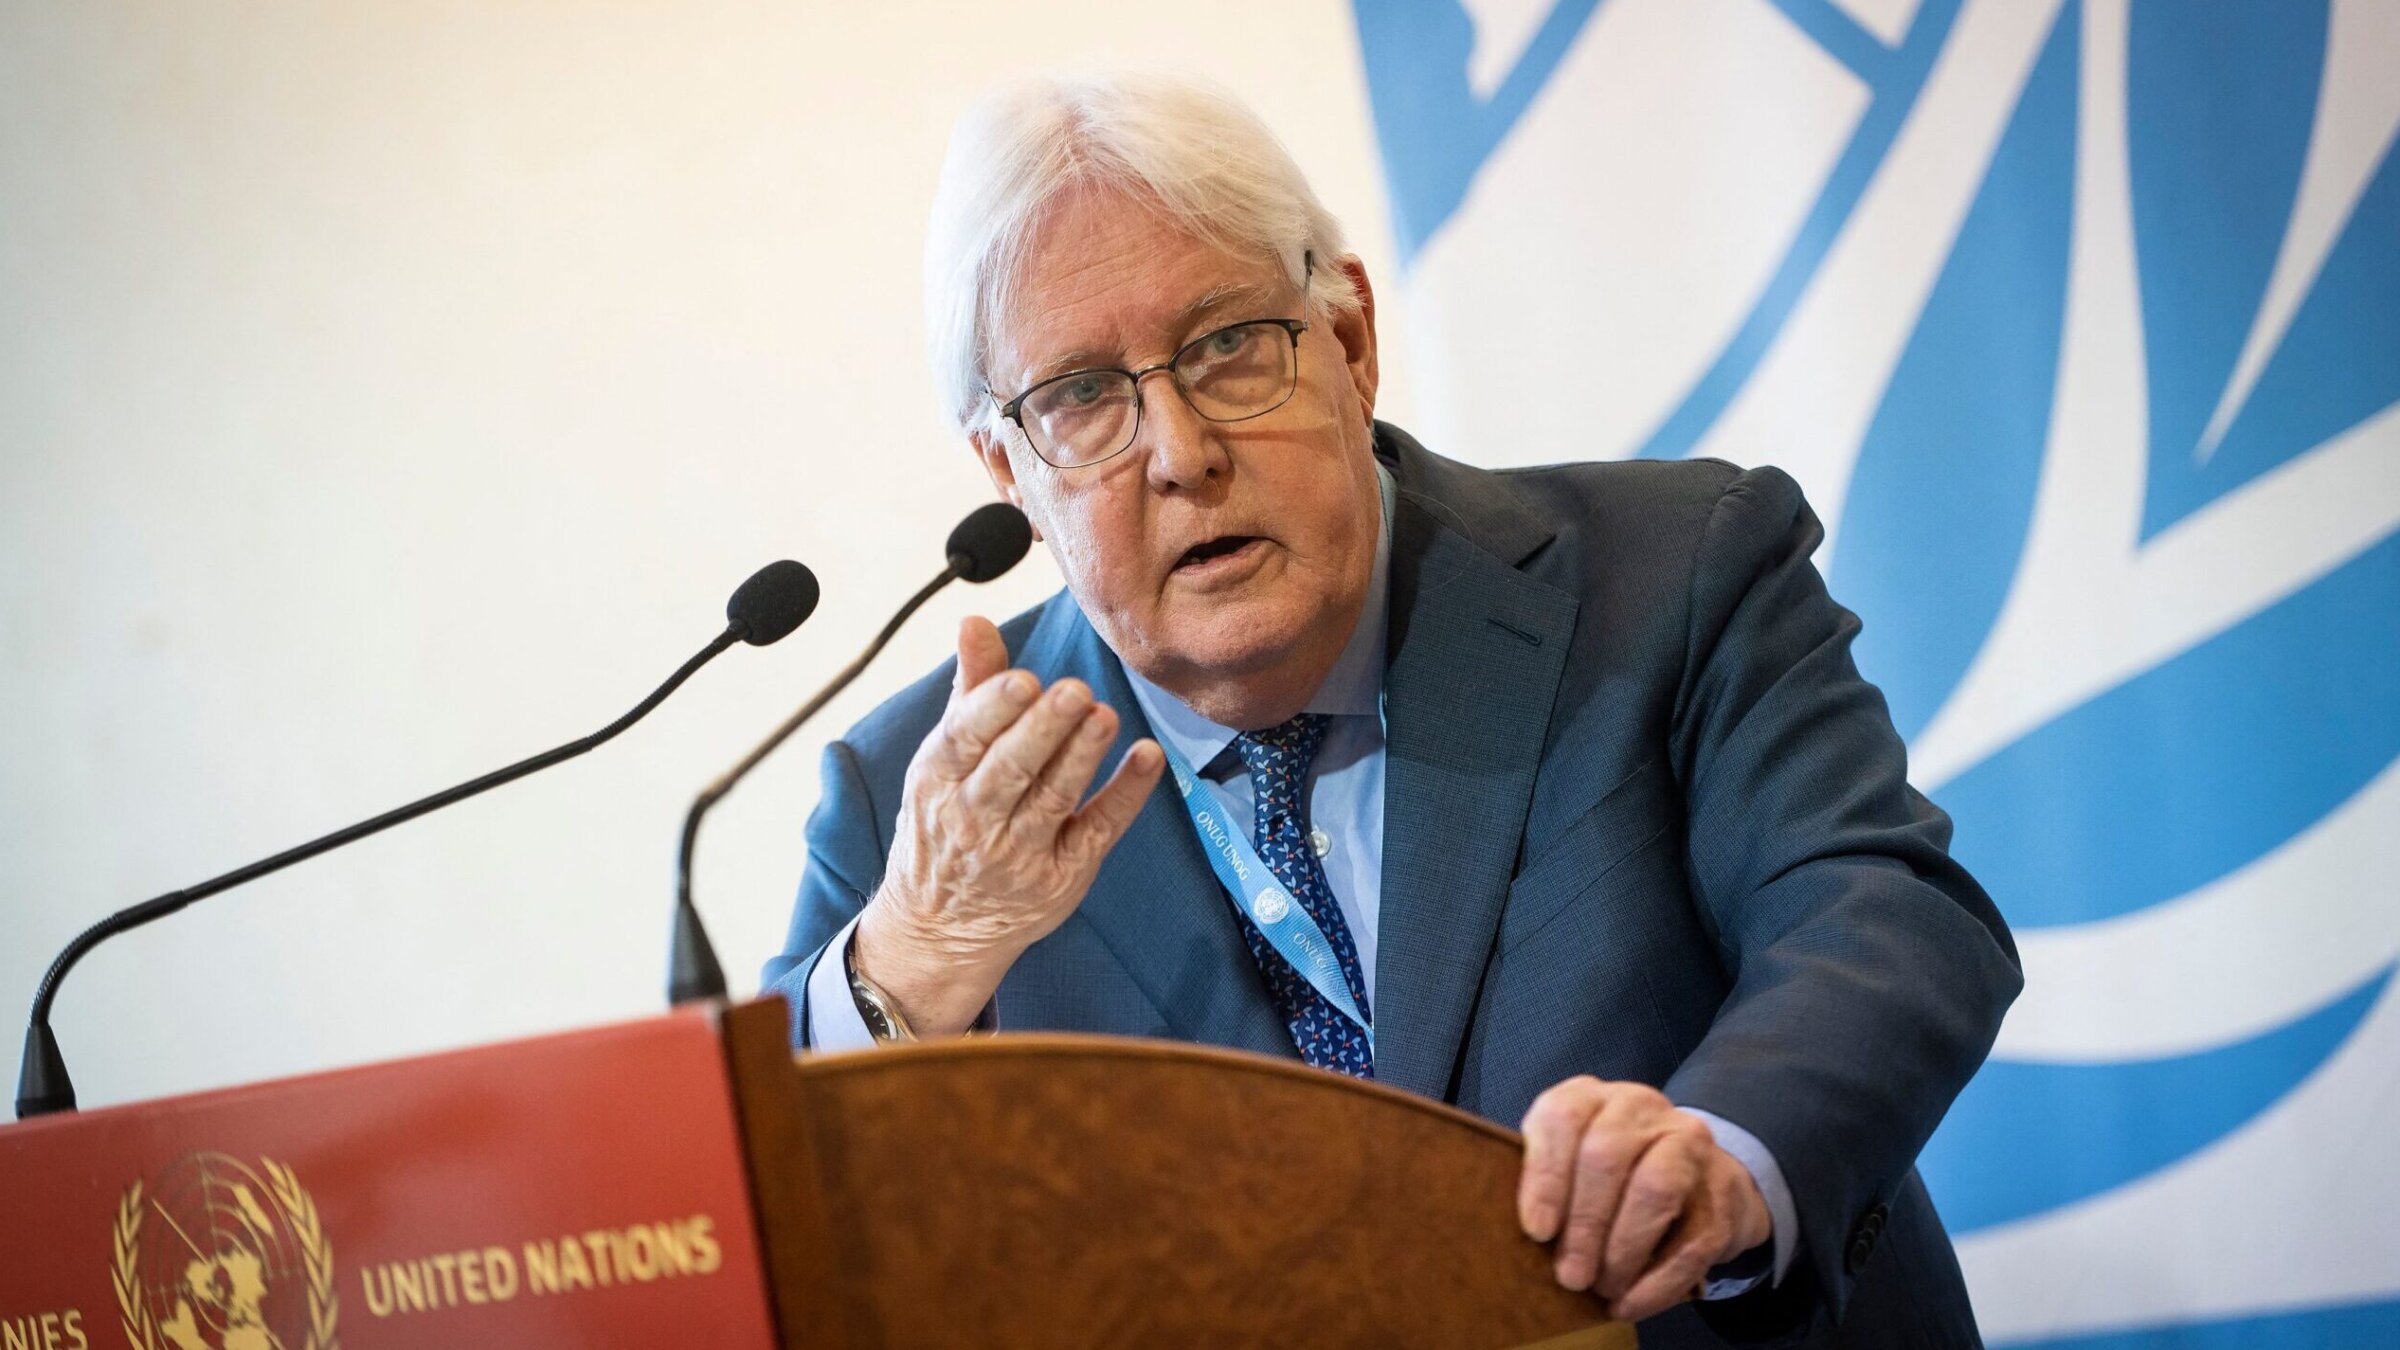 United Nations Under-Secretary-General for Humanitarian Affairs and Emergency Relief Coordinator Martin Griffiths speaks during a press conference on the situation in Gaza, at UN Building in Geneva, on Nov. 15, 2023. (Jean-Guy Python/AFP via Getty Images)